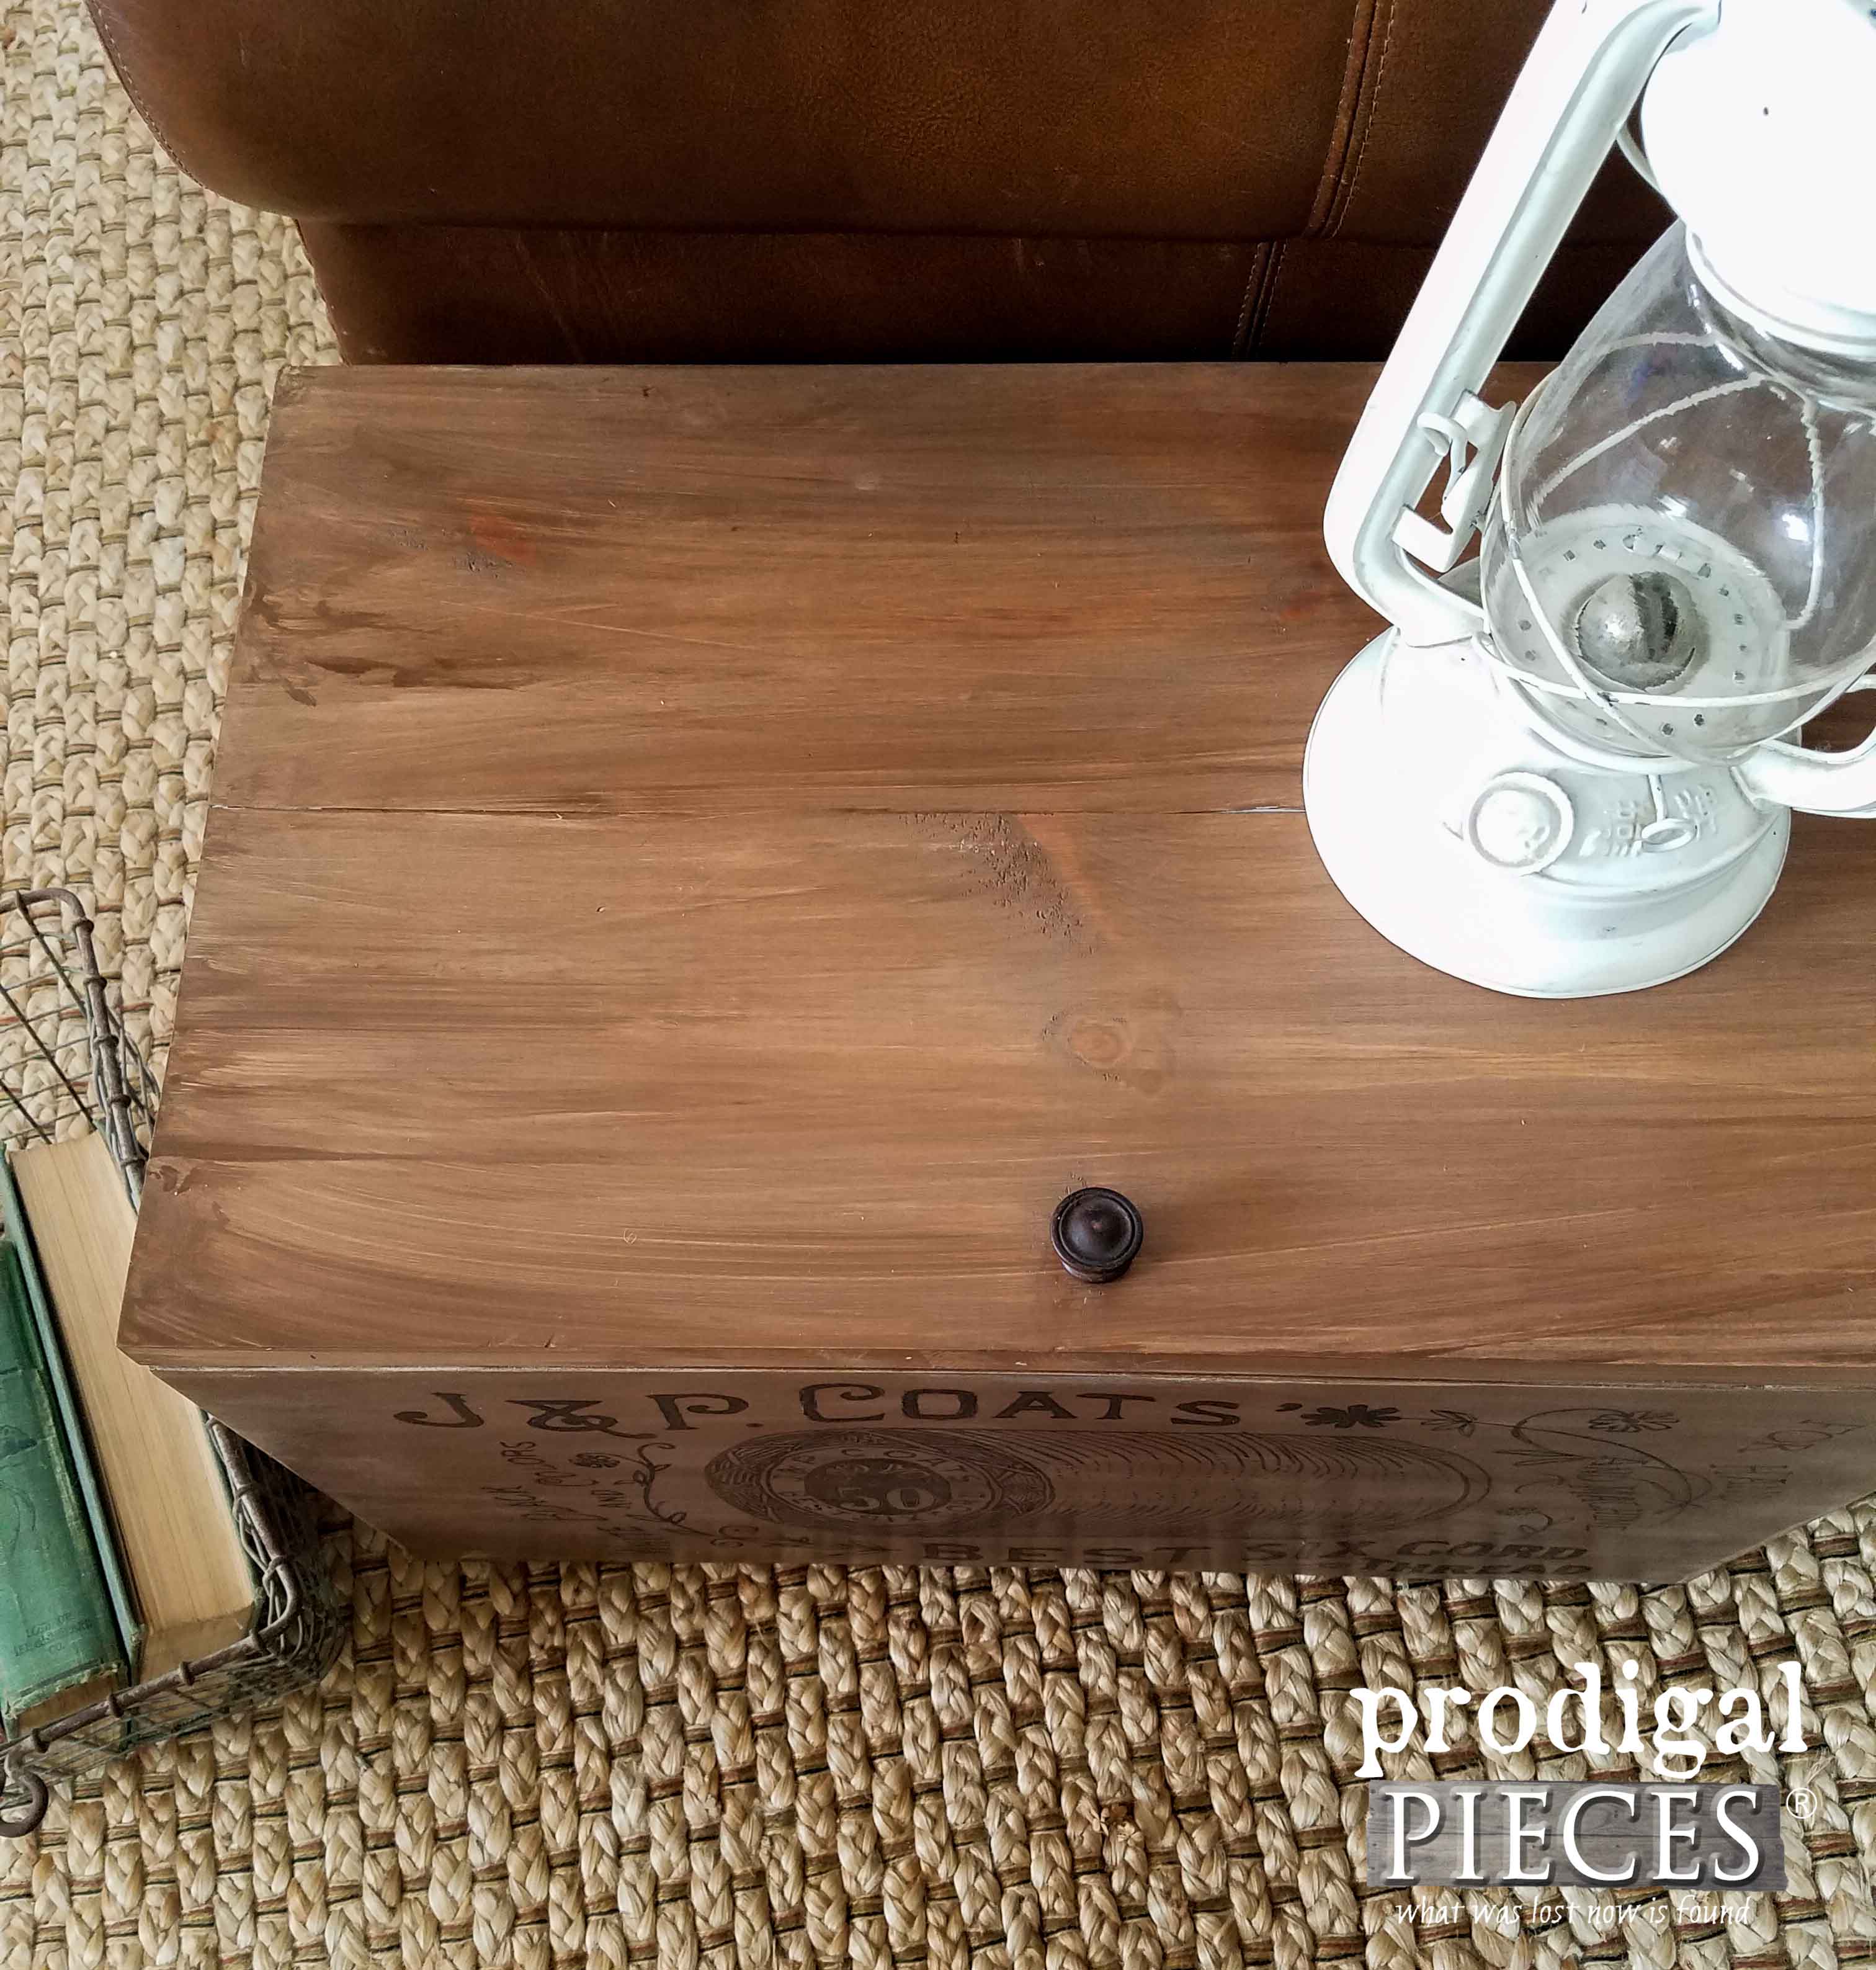 Upcycled Crate Made from Cabinet Doors by Prodigal Pieces | prodigalpieces.com